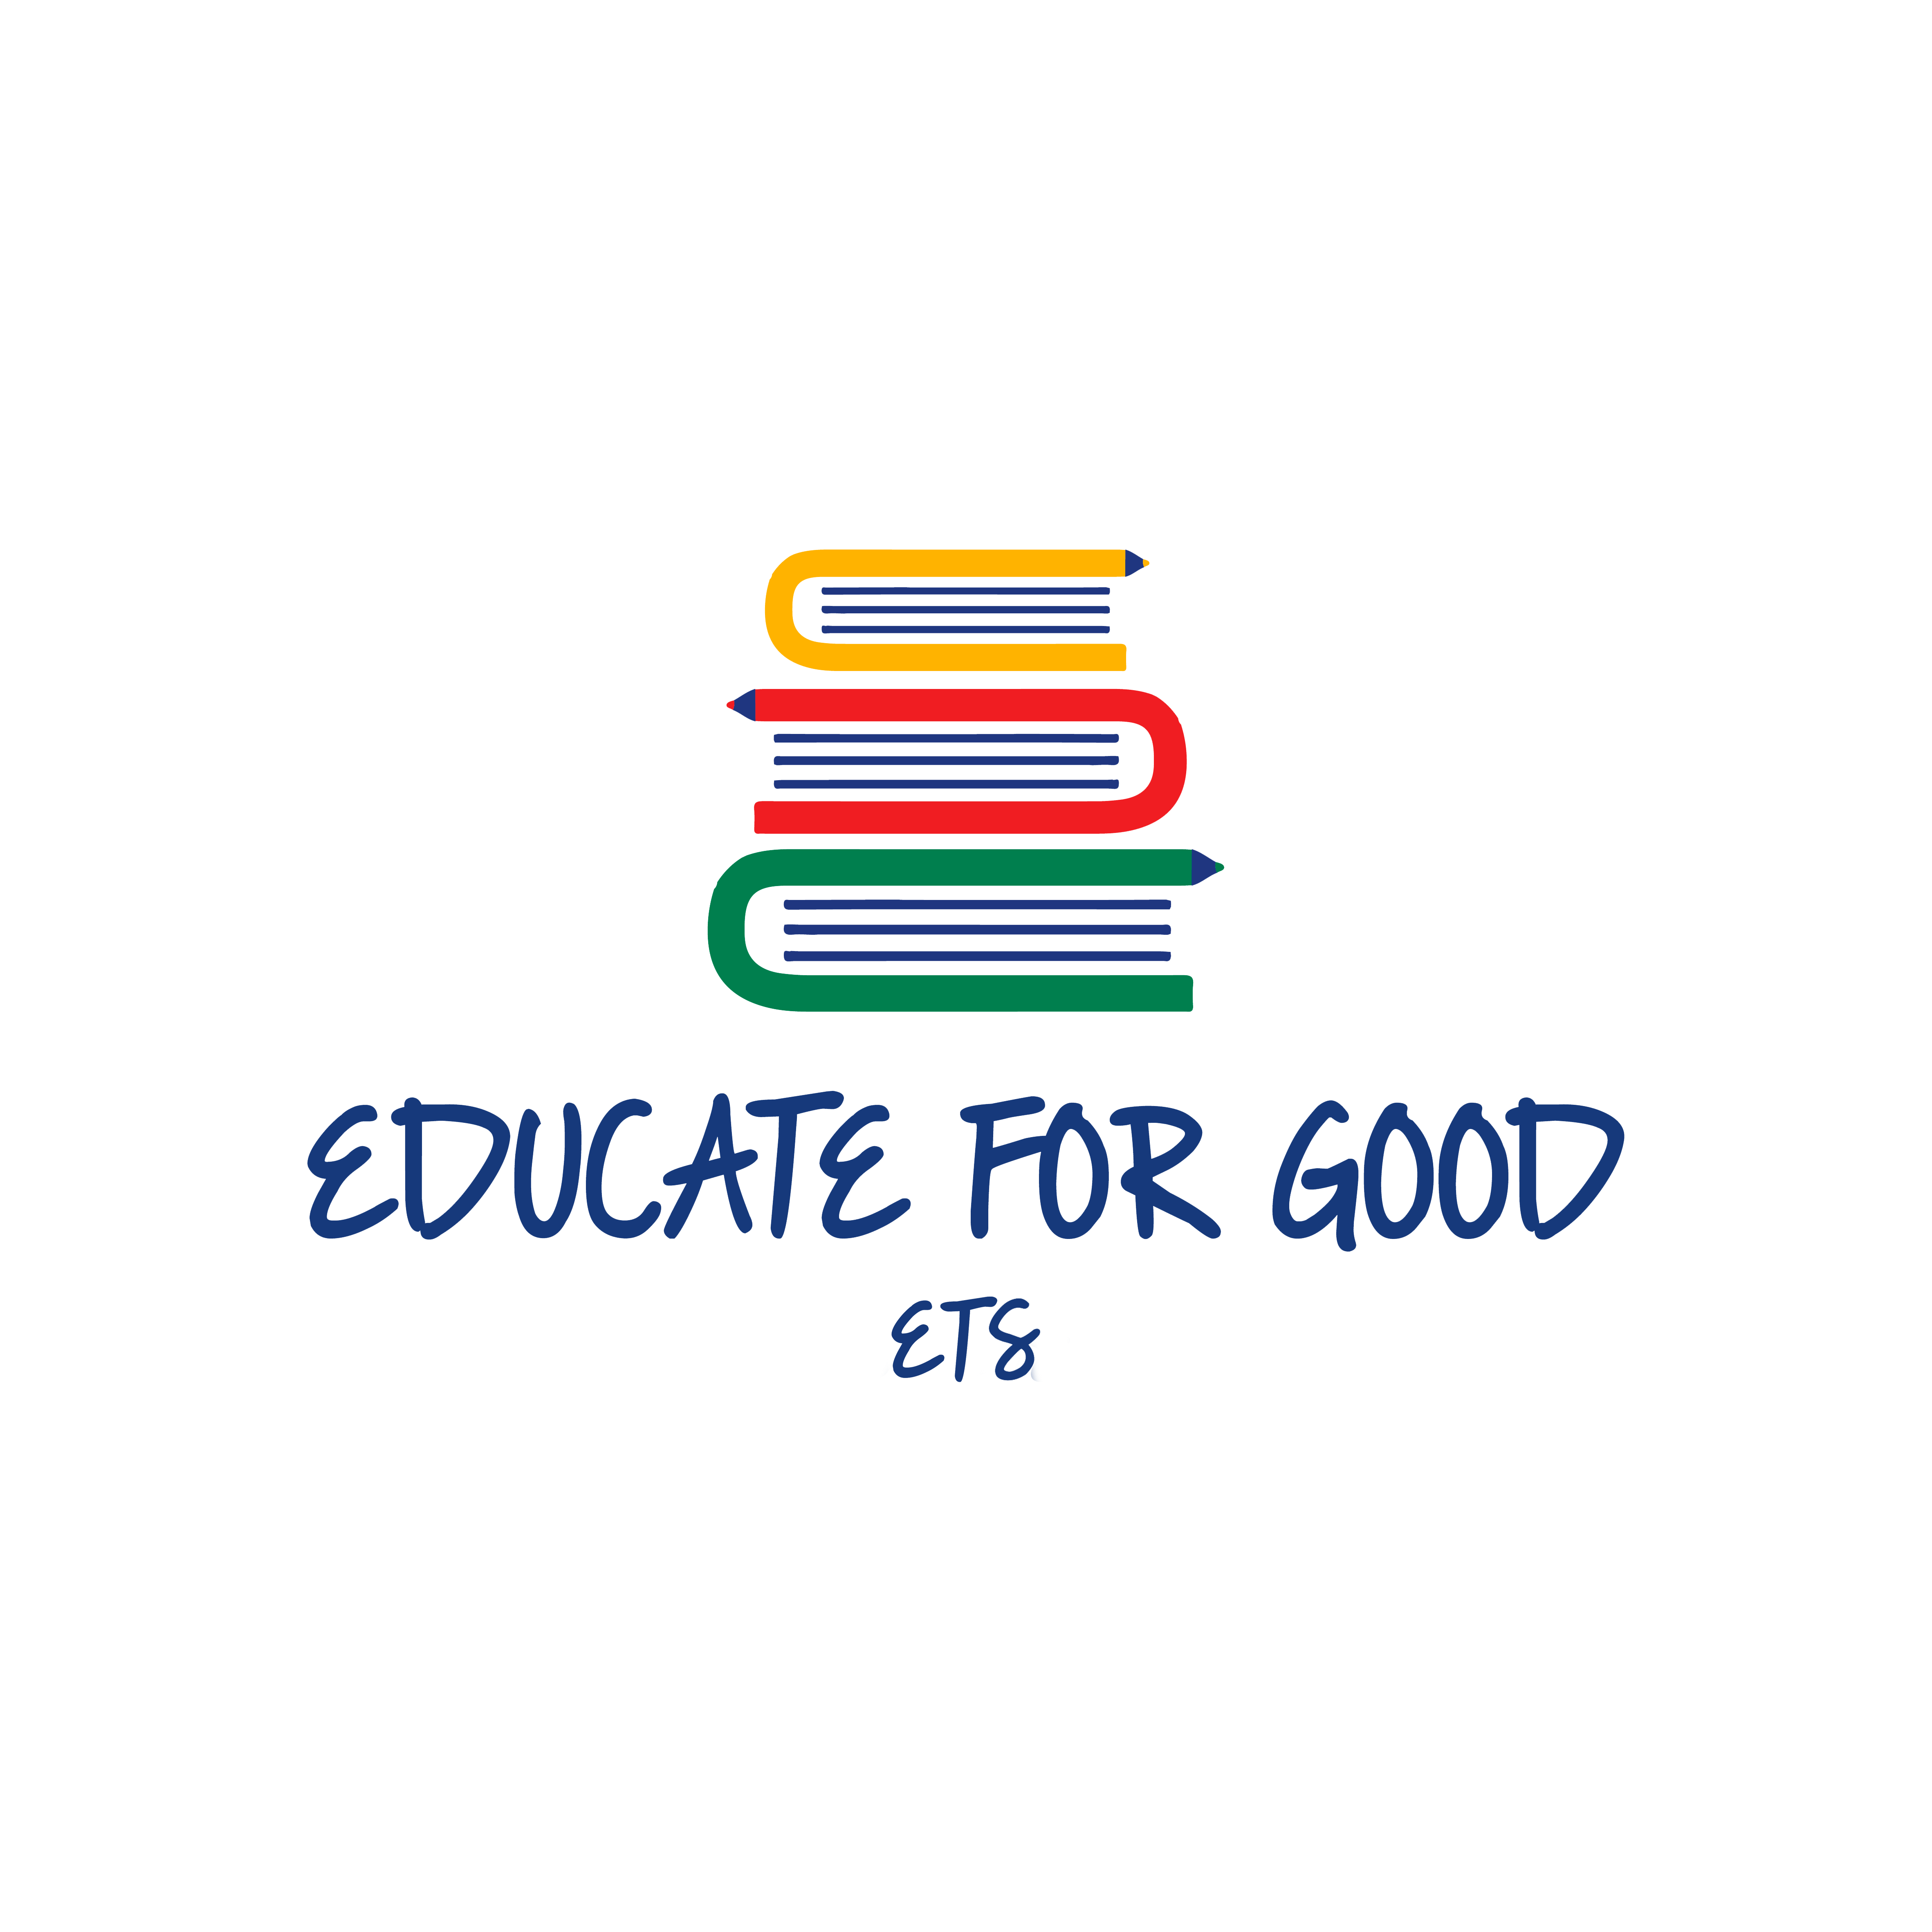 Educate for Good